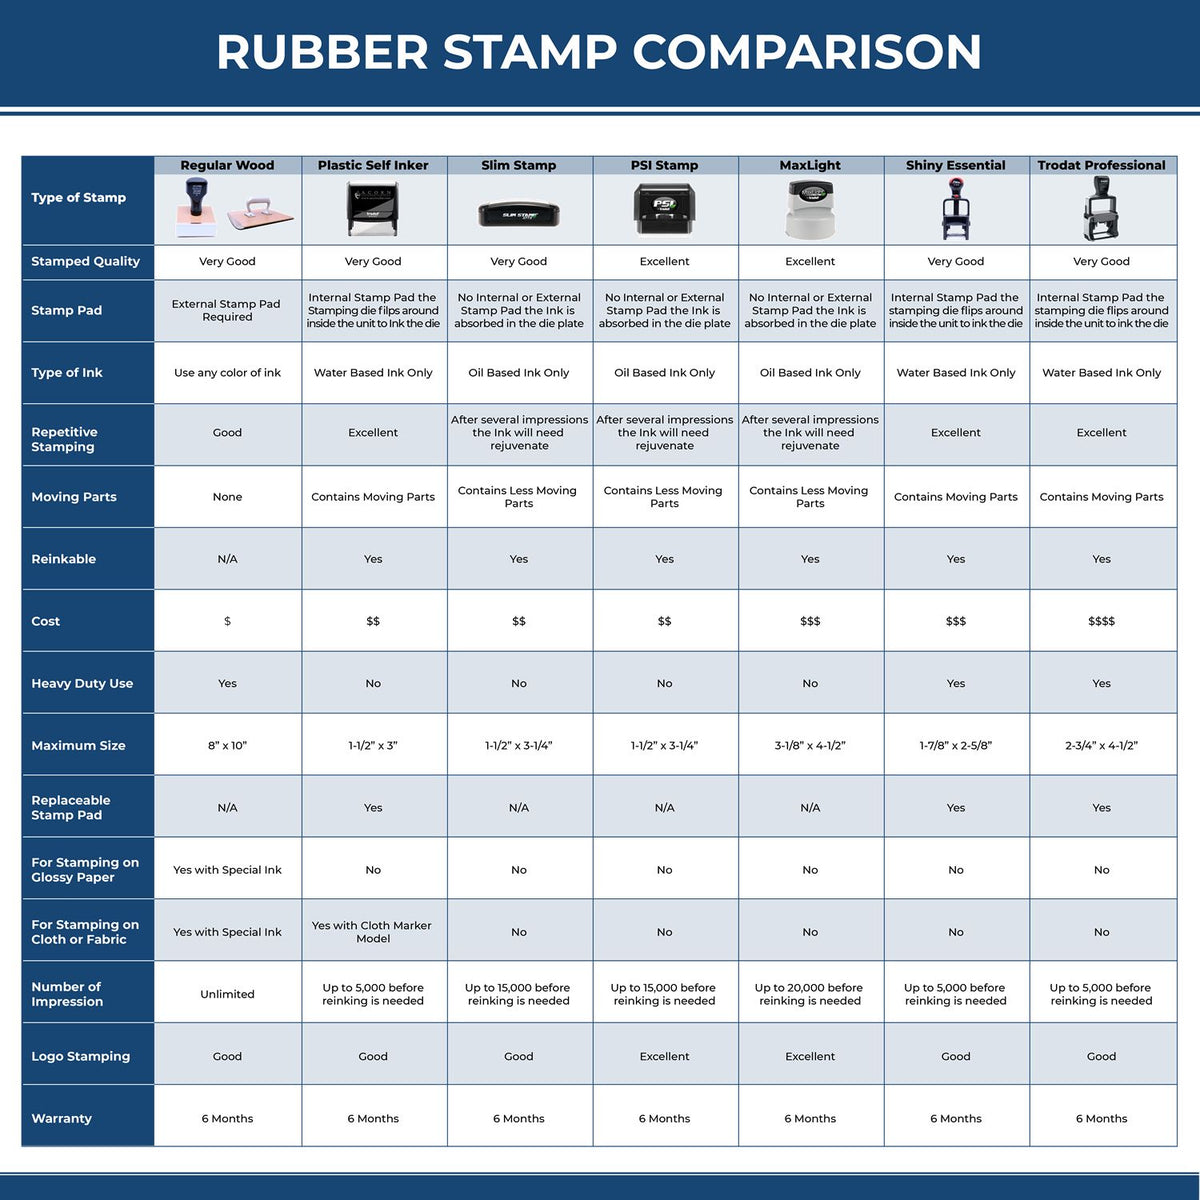 A comparison chart for the different types of mount models available for the Self-Inking Rectangular Guam Notary Stamp.